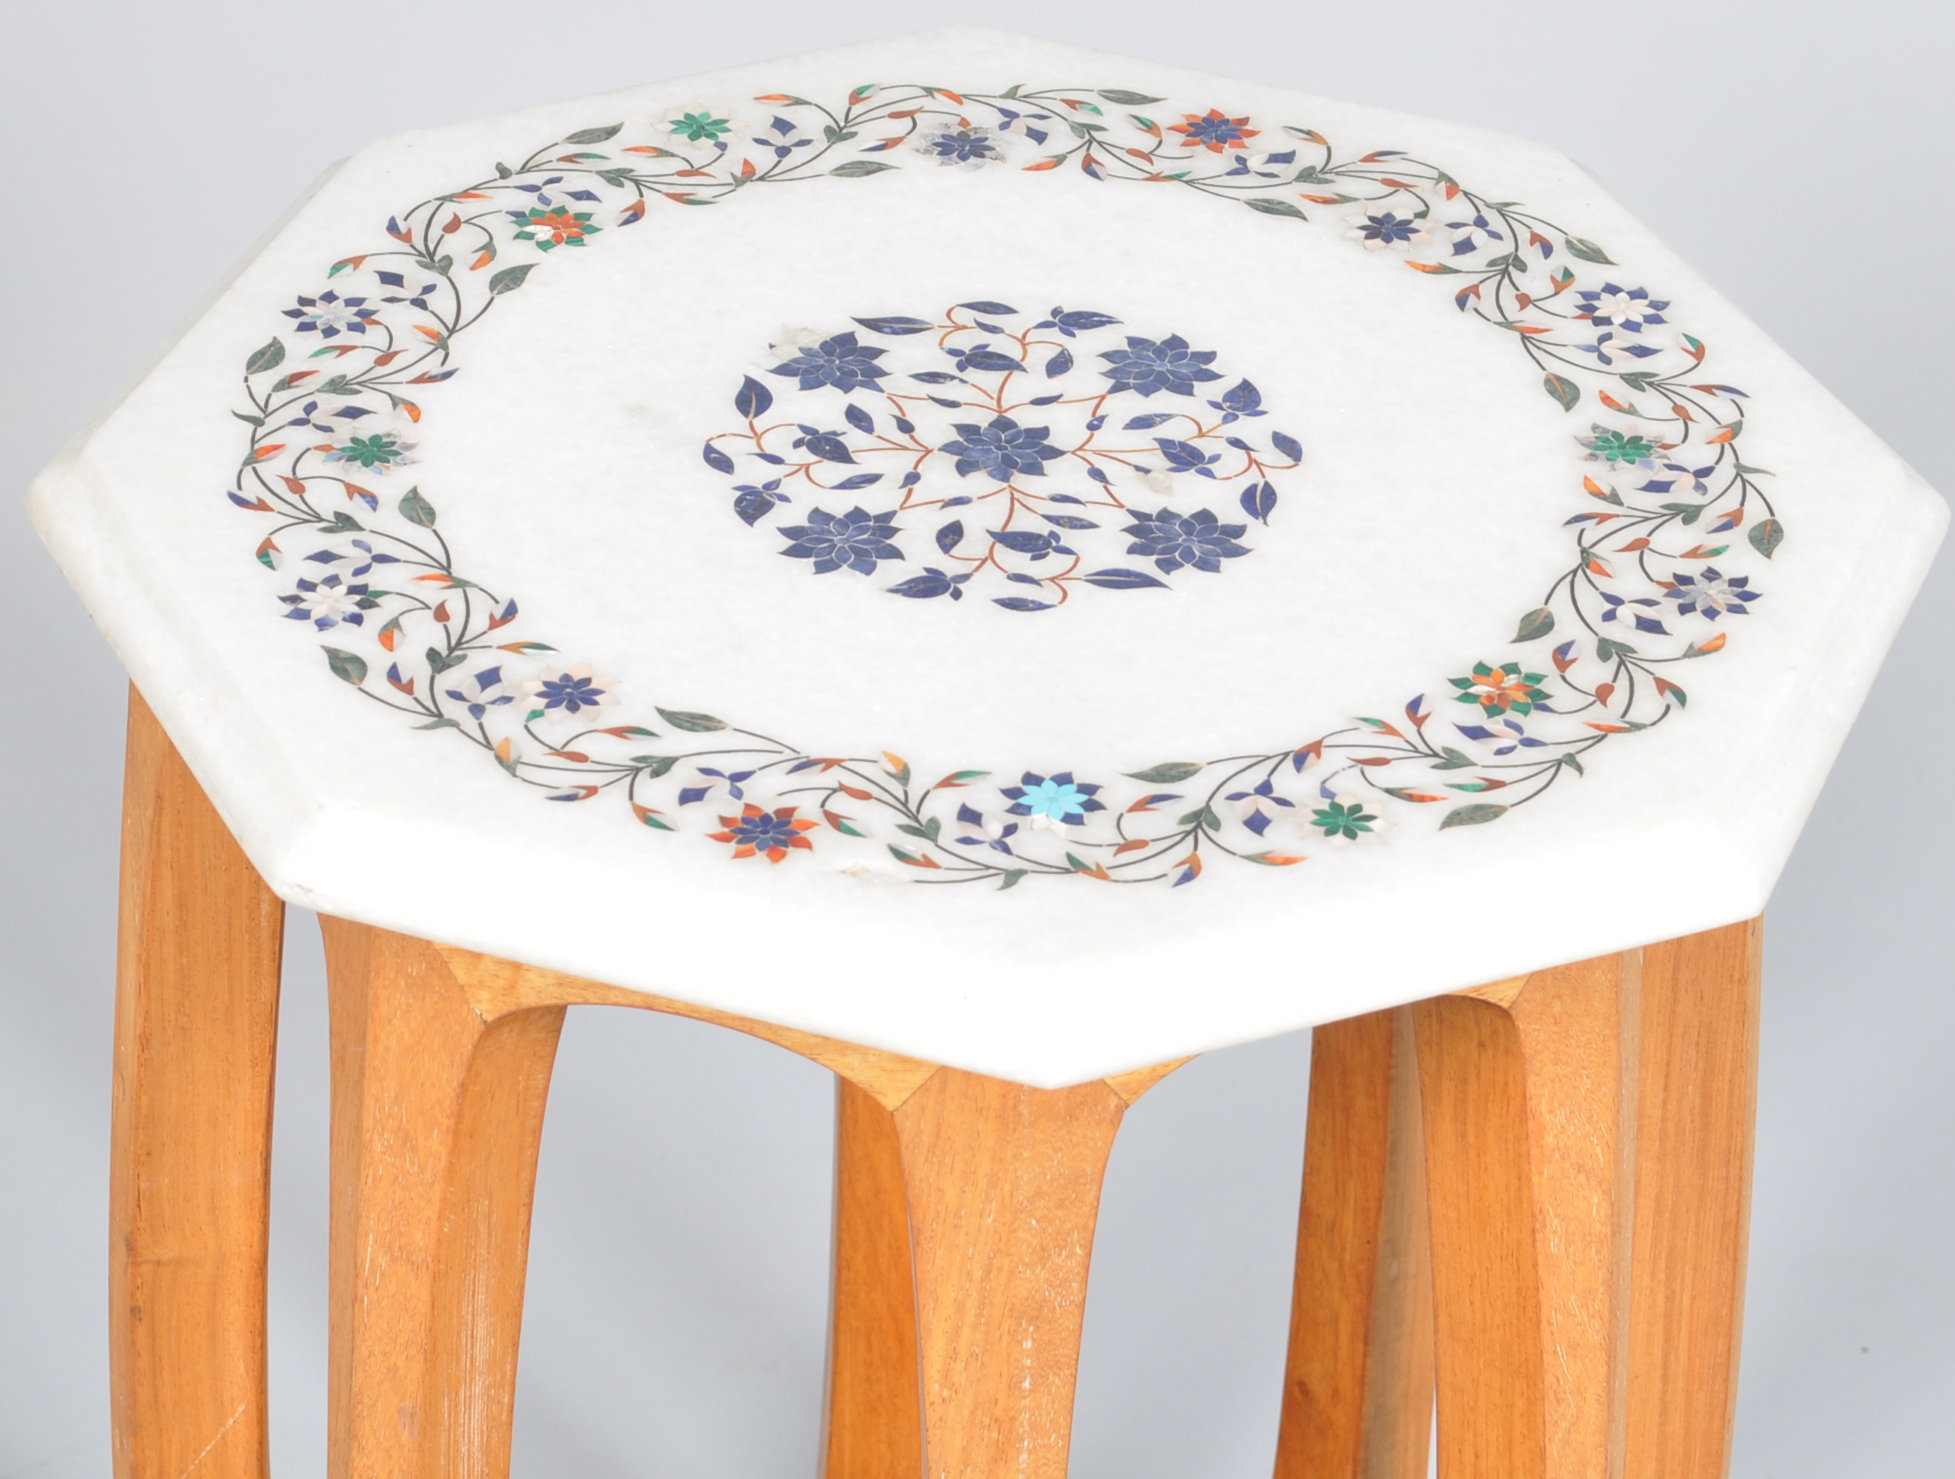 An Indian Mughal Jali inlaid marble octagonal table top, - Image 2 of 3